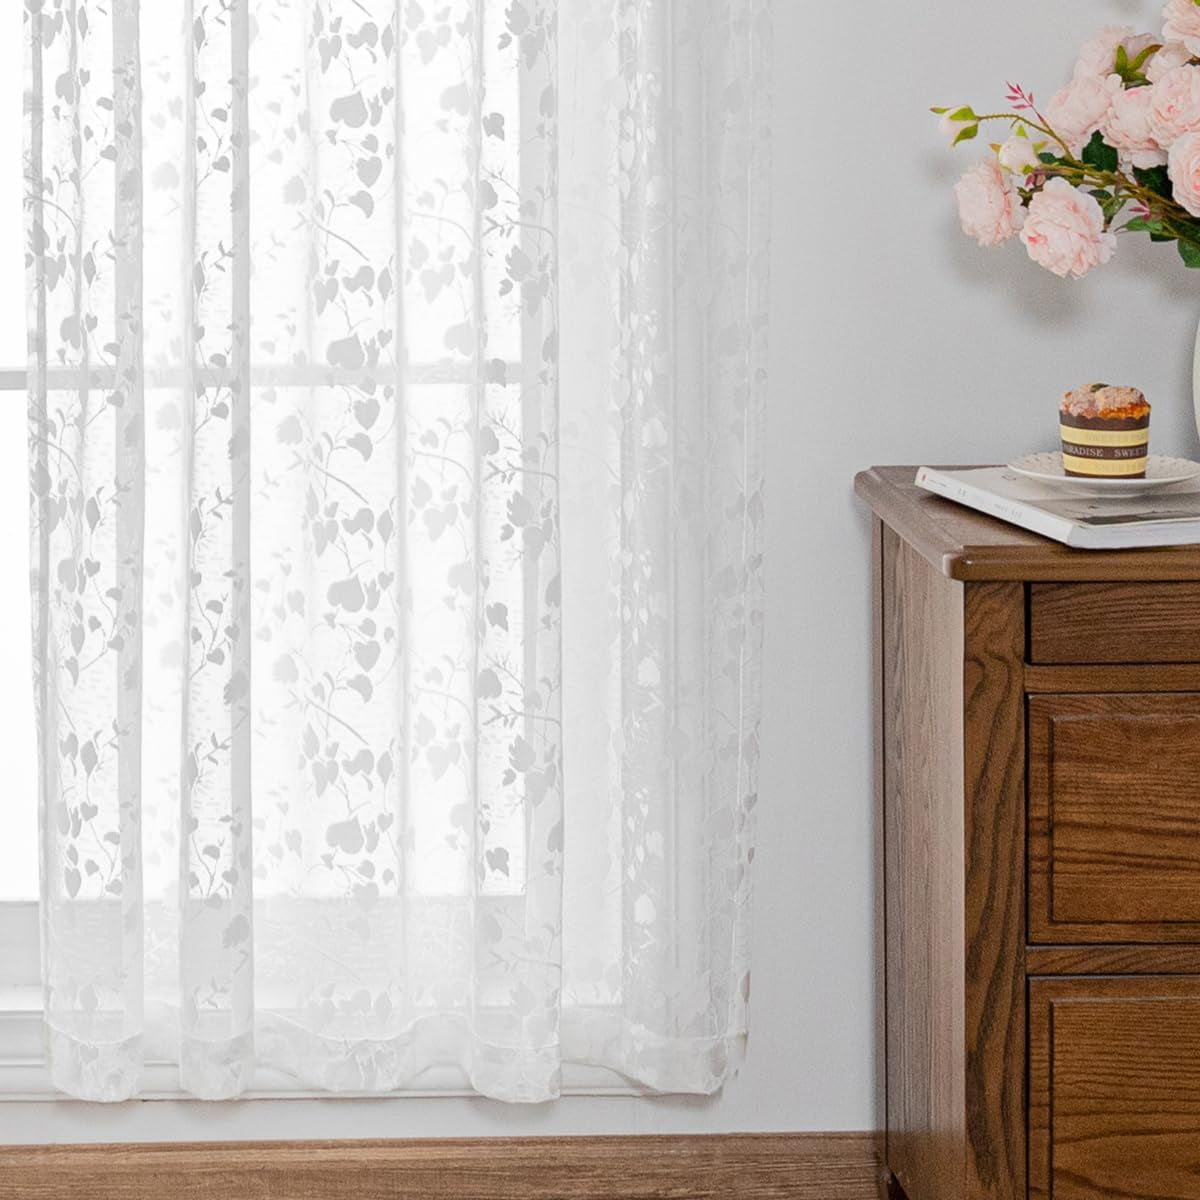 H.Ebony White Lace Sheer Curtains 84 Inch Length for Bedroom, Premium Leaf Floral Pattern Voile Sheer Lace Curtains for Living Room Set of 2 Panels, 52 X 84 Inch, 1 Pair, White  H.ebony   